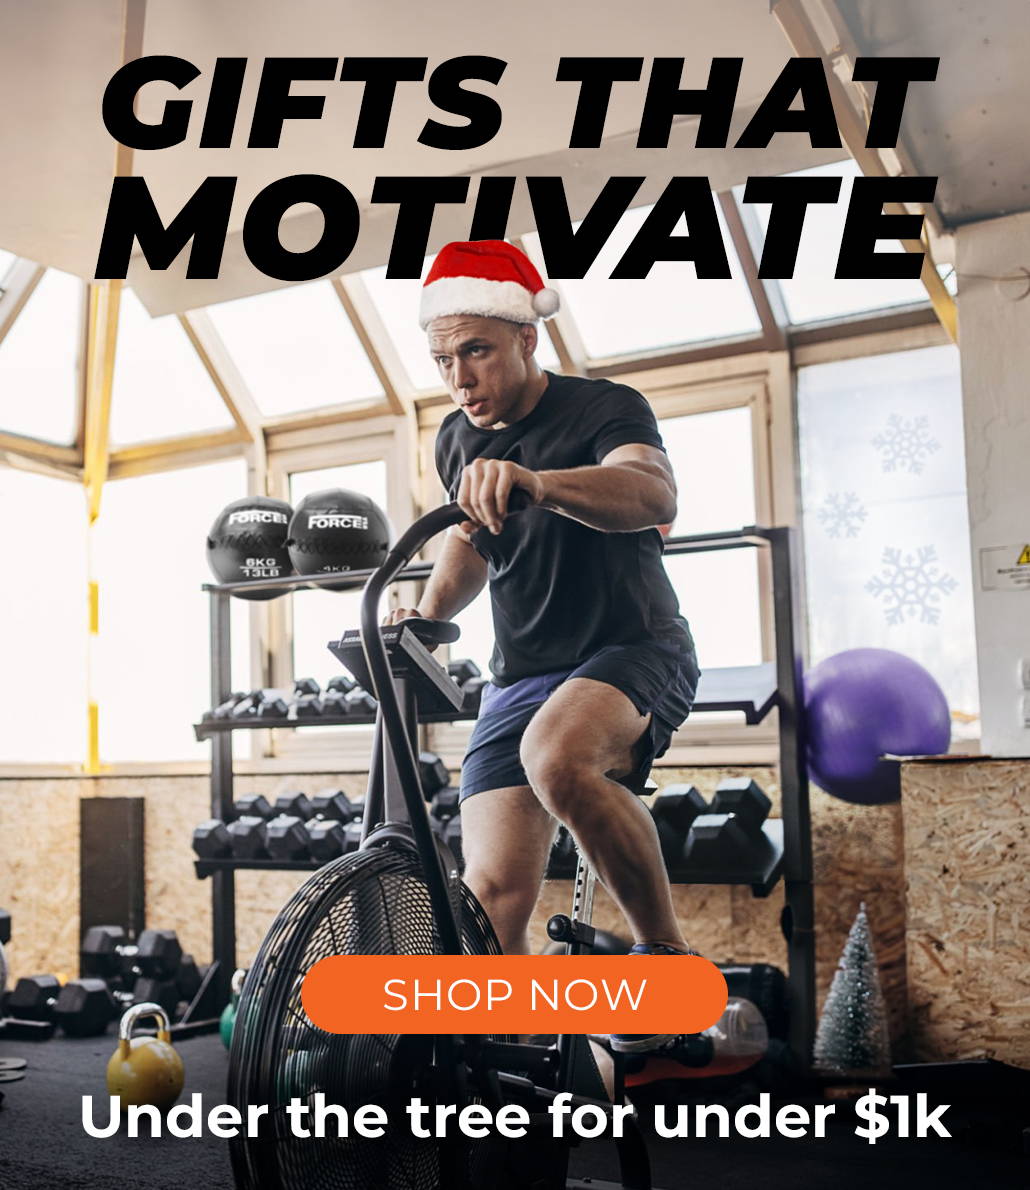 Man exercising on an Air Bike in a home gym, surrounded by gym equipment and festive Christmas decorations, with text overlay: 'Gifts that Motivate - Find the Perfect Fitness Present Under Your Tree for Under $1k.